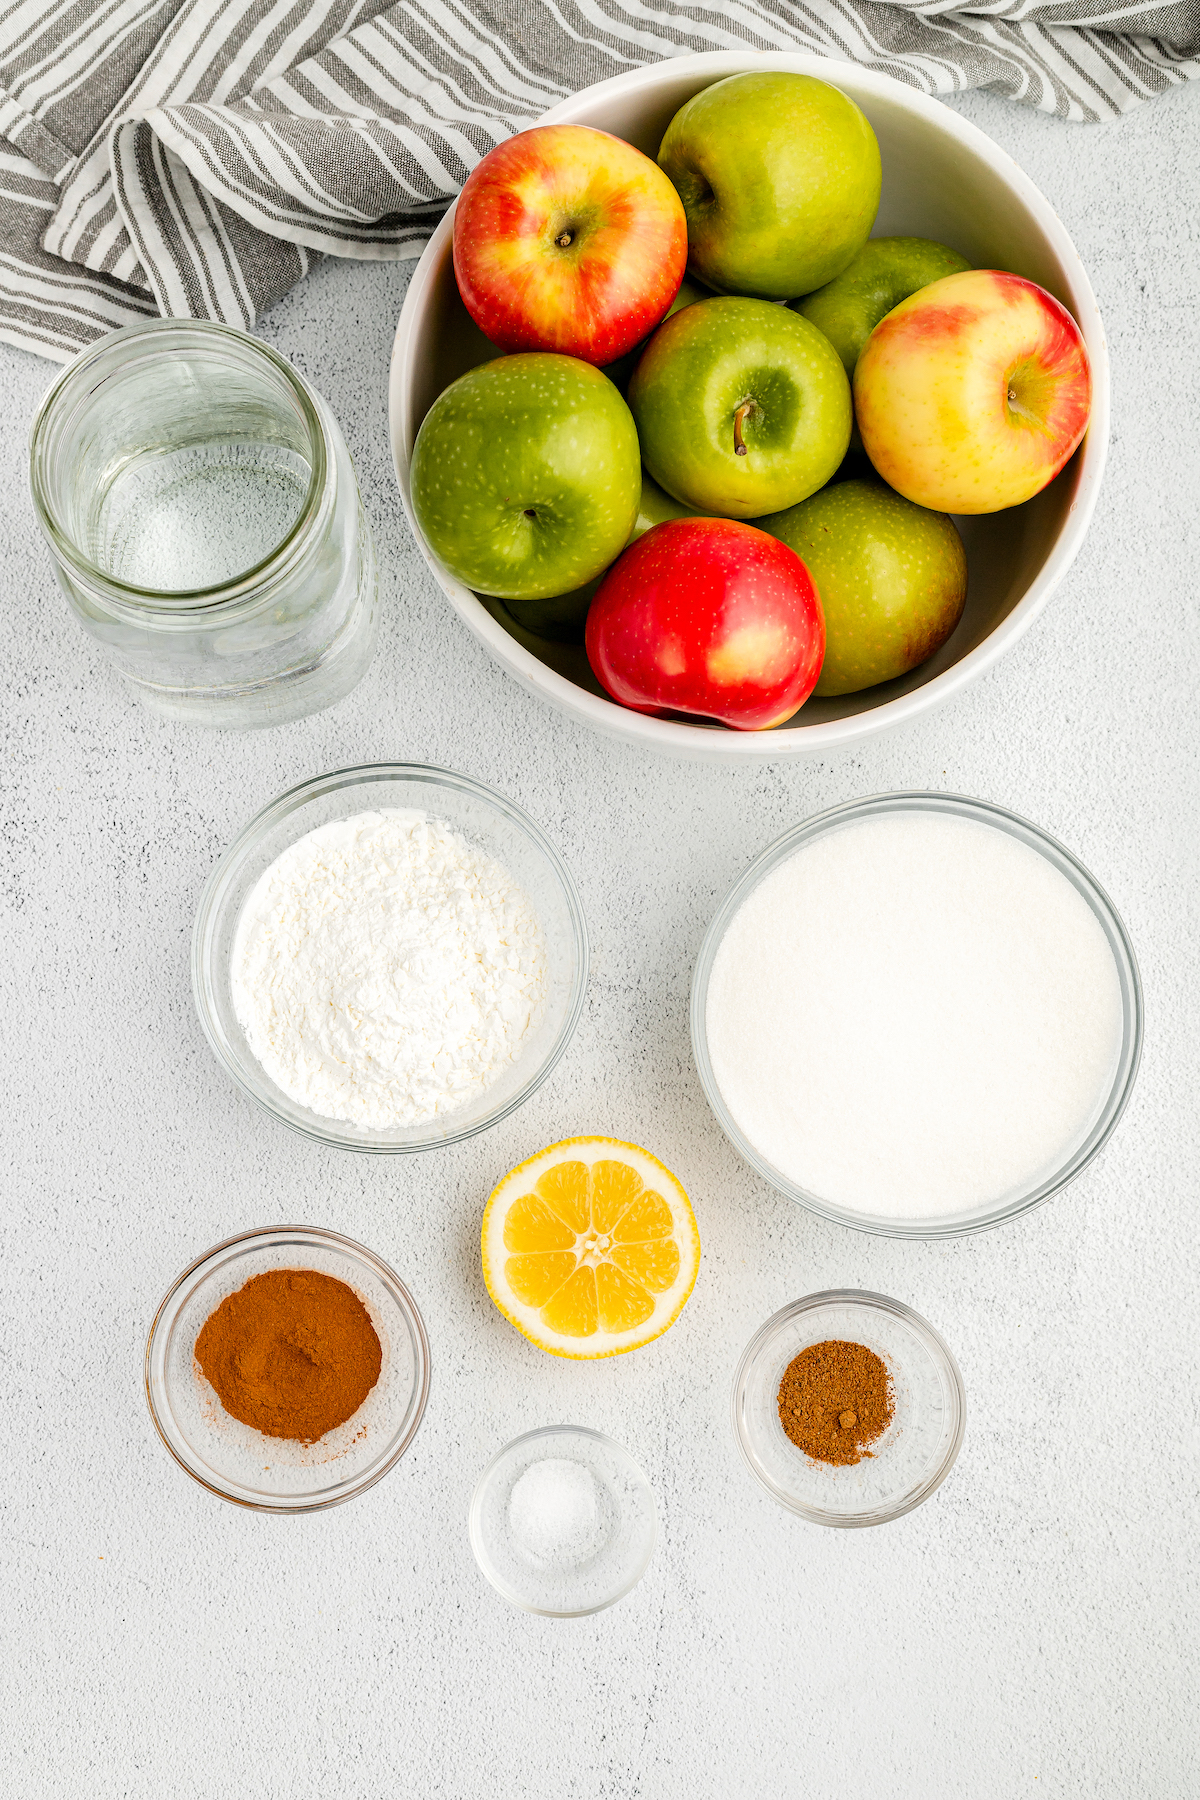 The ingredients for homemade apple pie filling.